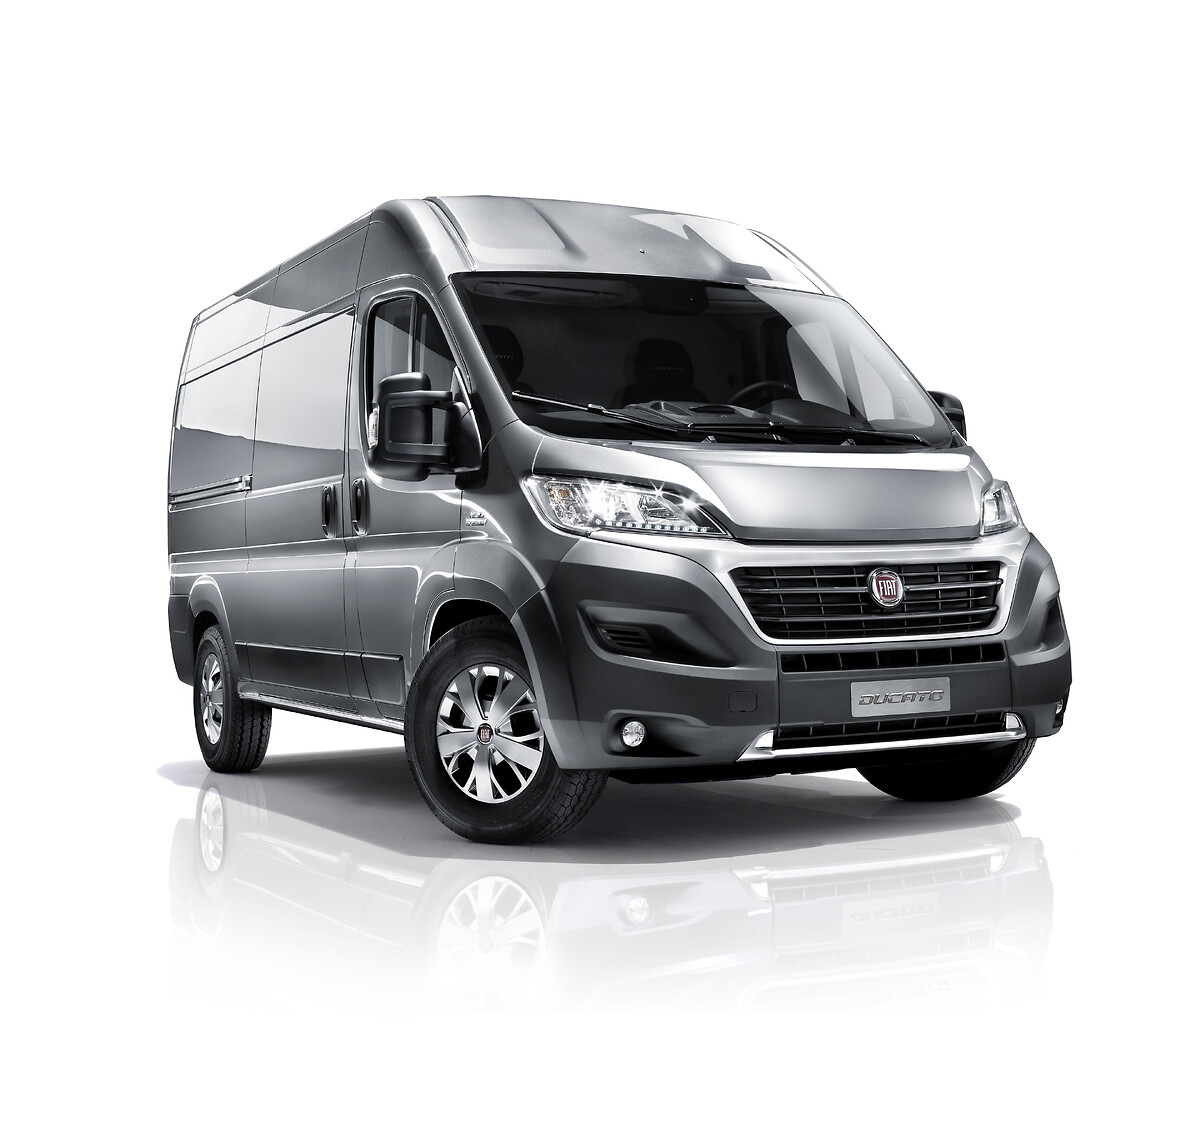 THE NEW FIAT DUCATO: MORE TECHNOLOGY, MORE EFFICIENCY, MORE VALUE